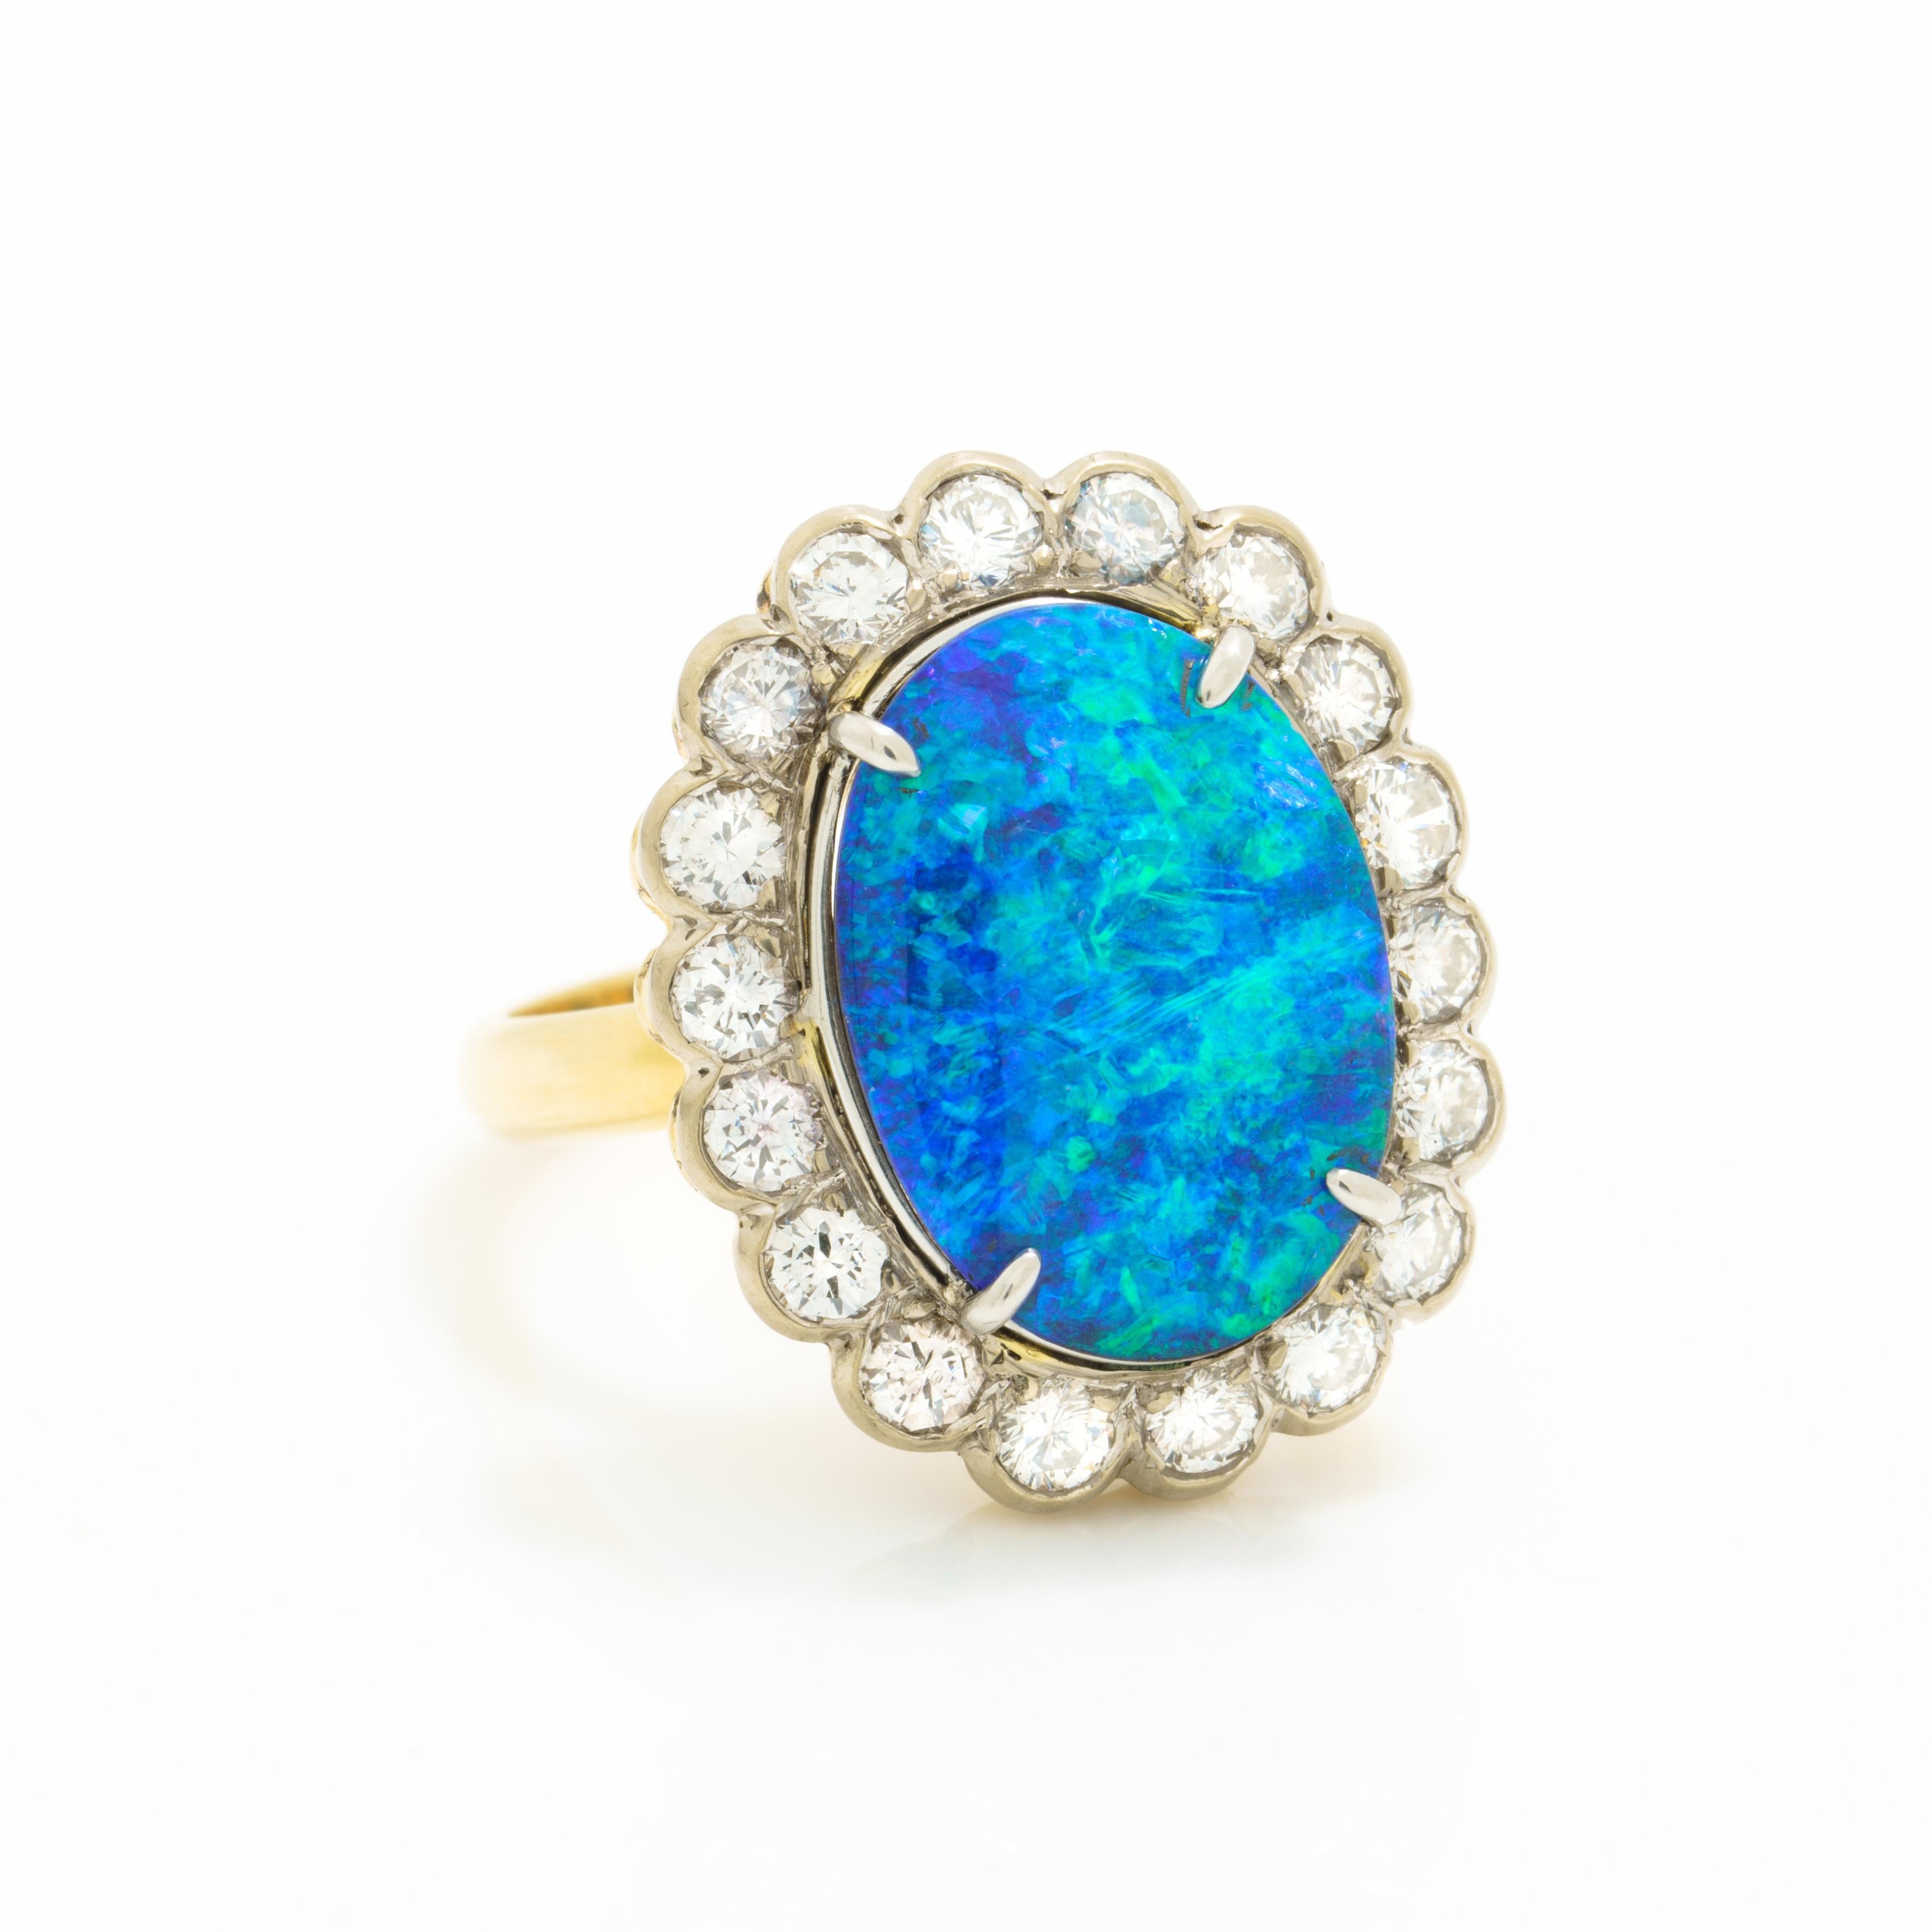 Vintage 18 Karat Gold and Platinum 5.0 Carat Black Opal and 1.25 Carats Diamond Halo Ring
c.1960s
Size 6.5 - sizable
7.7 grams
This is the one YOU have always been seeking
Insanely bright and fiery Opal
very good condition. stunning opal. bright